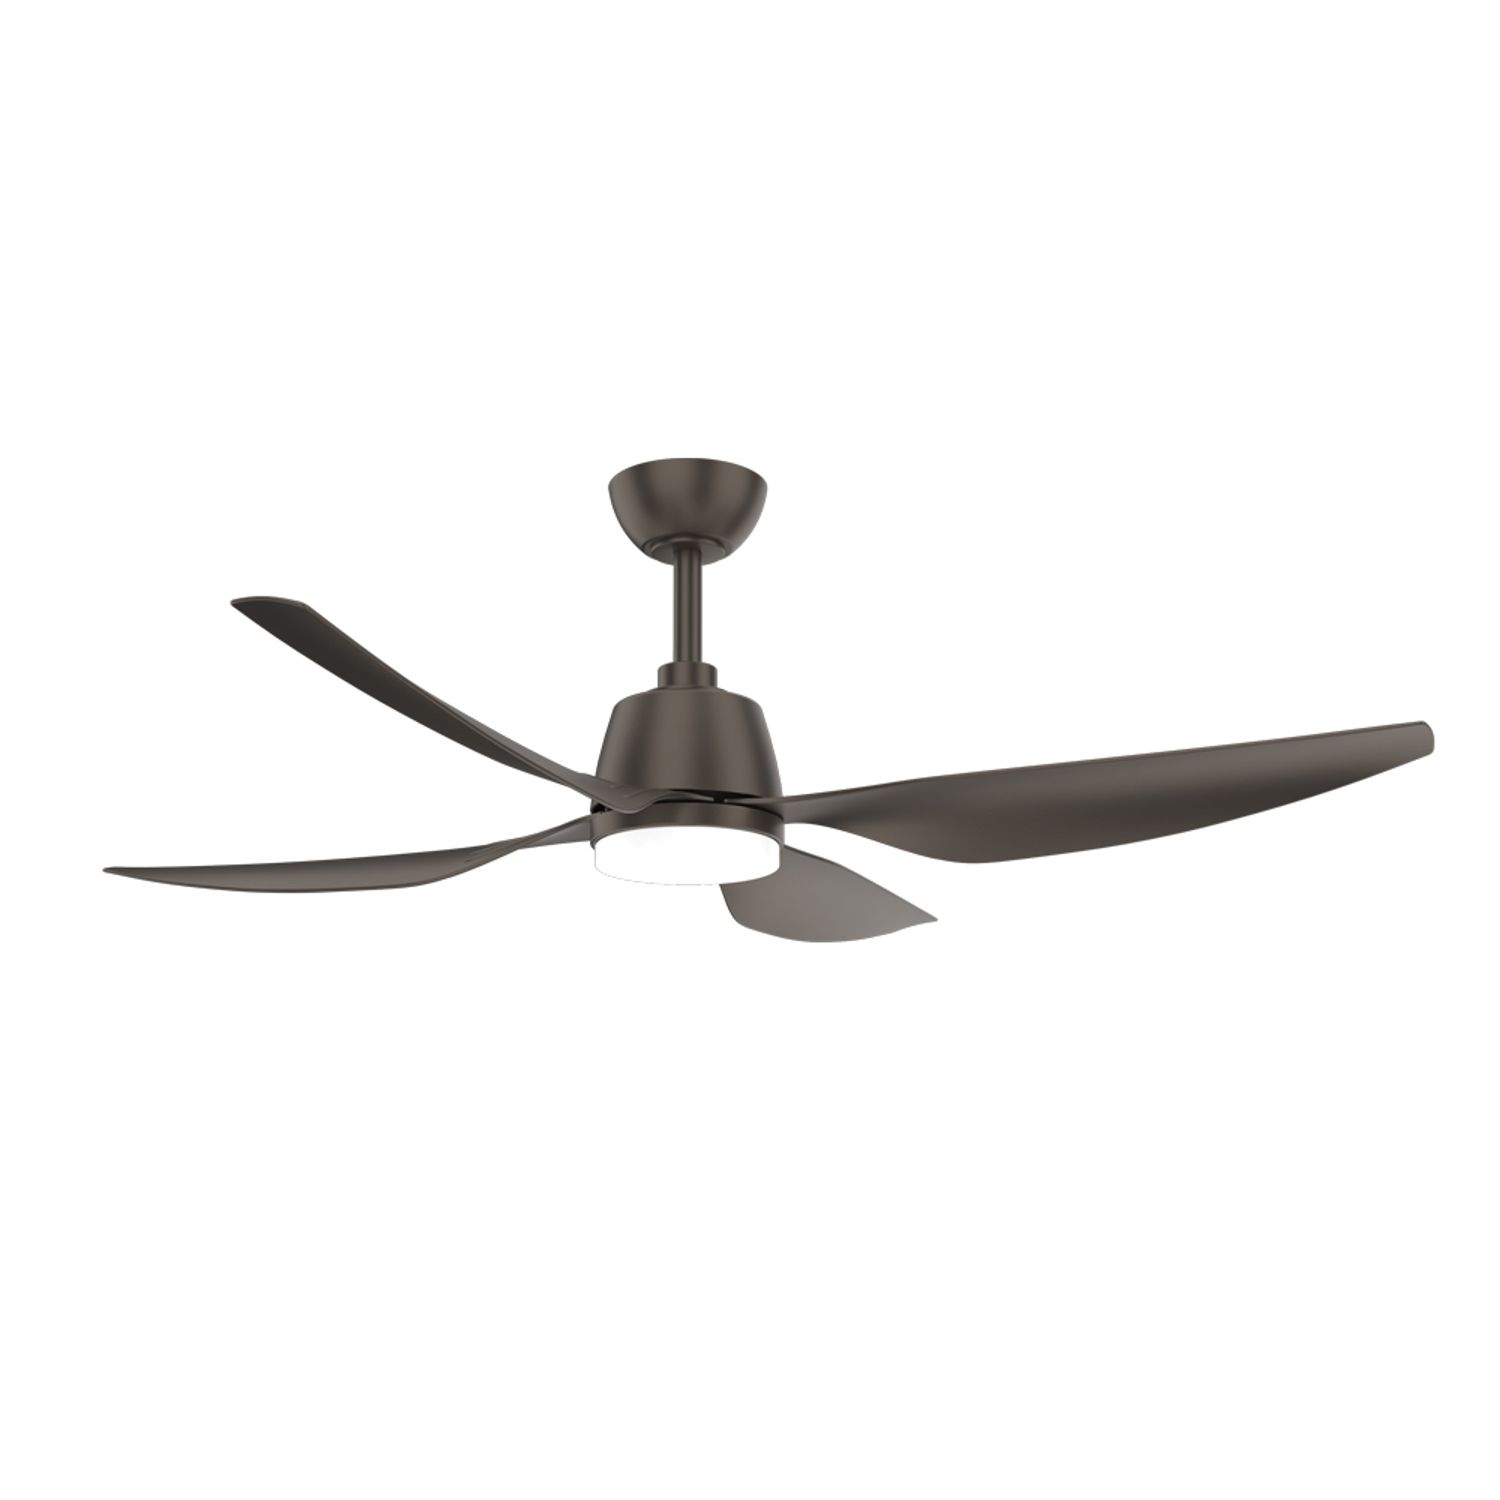 KBS Wholesale four blade ceiling fan with light